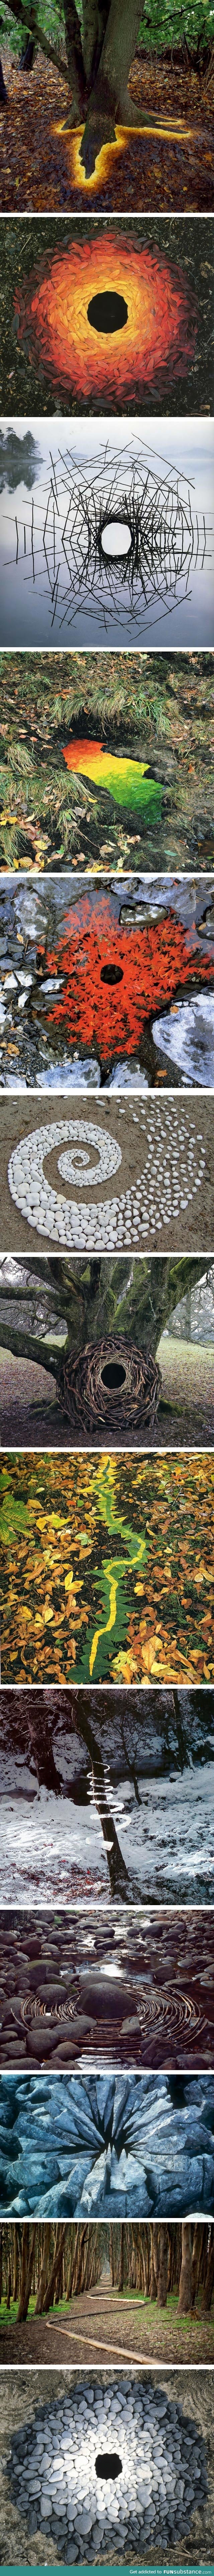 An Artist Used Nature To Create Some Amazing Land Art